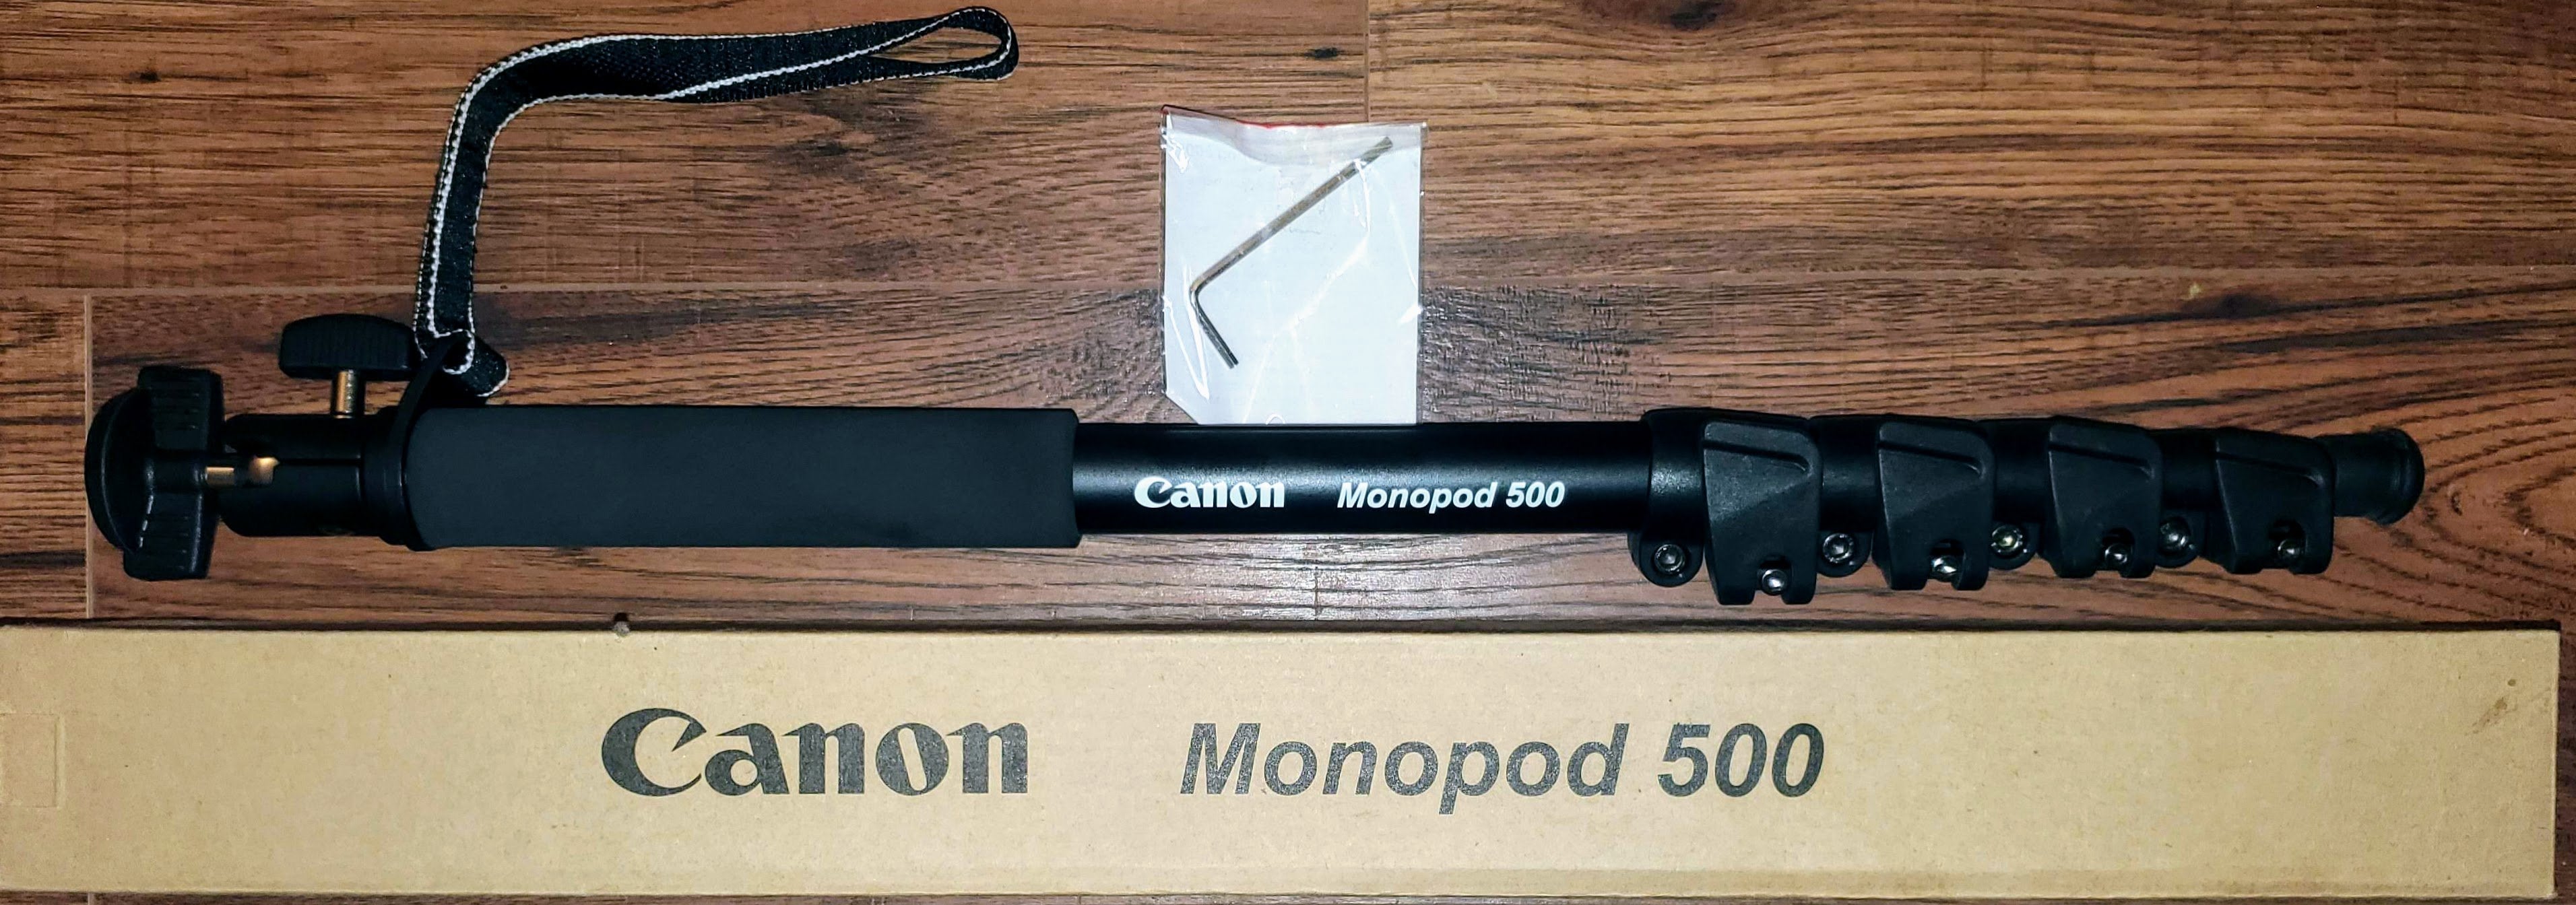 NIB Canon 5-Section Monopod 500 w/ Mini Ball Head for DSLR Cameras 5 section leg - brand new never been used - new